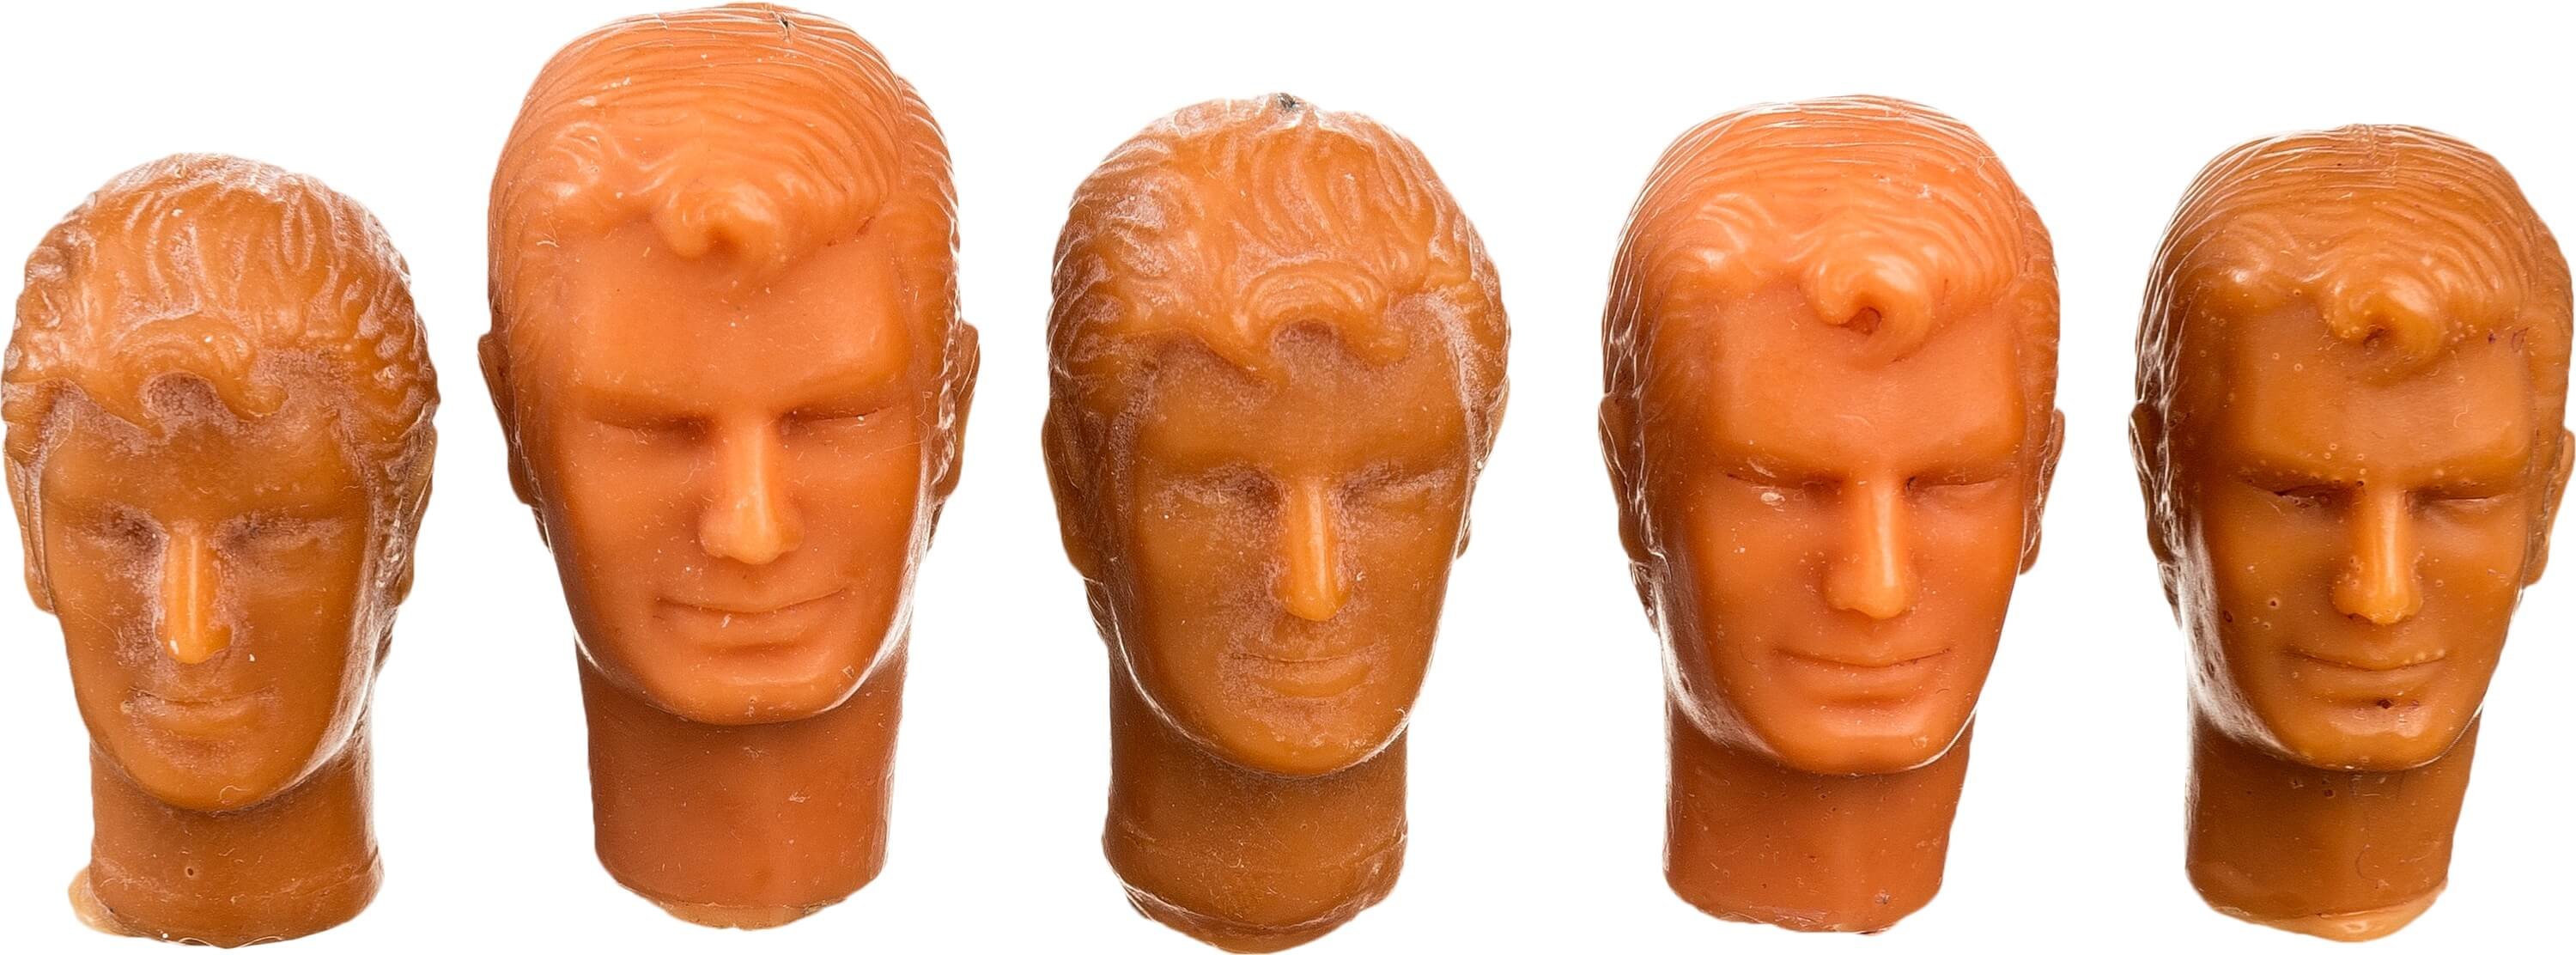 Original mego head sculpt prototype for Superman and Aquaman from the Mego World's Greatest Superheroes.